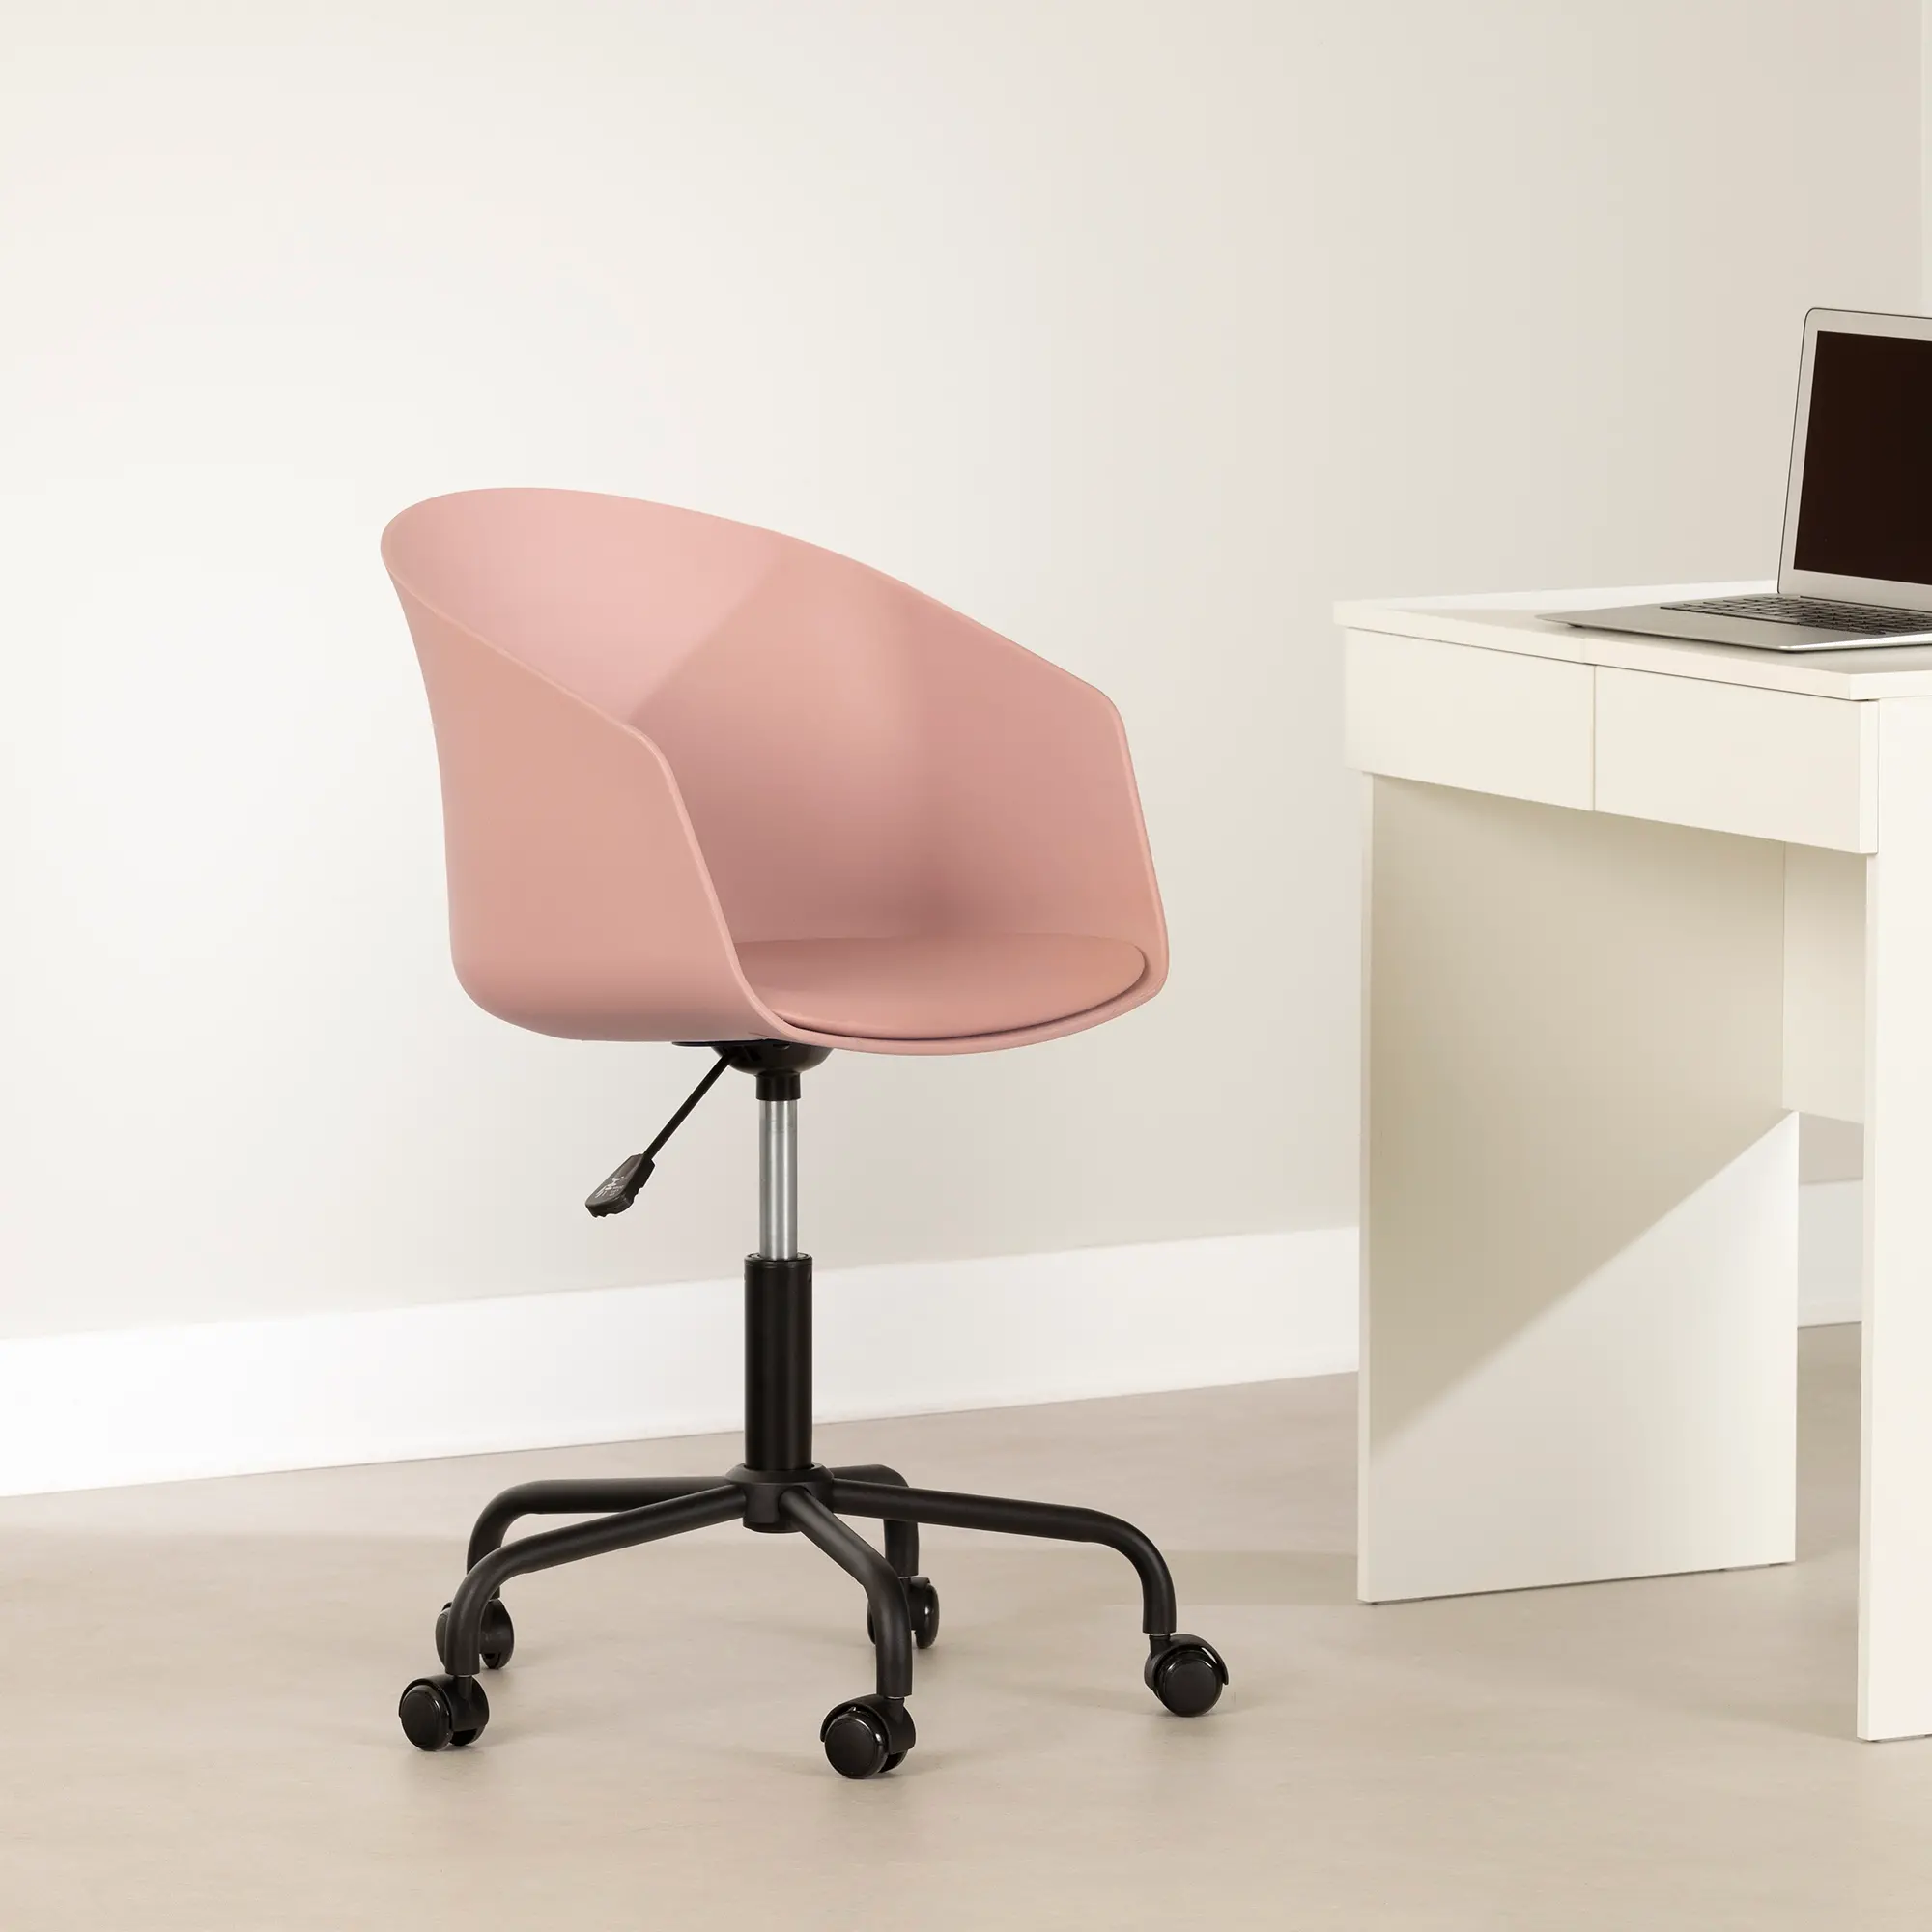 Flam Pink and Black Swivel Chair - South Shore